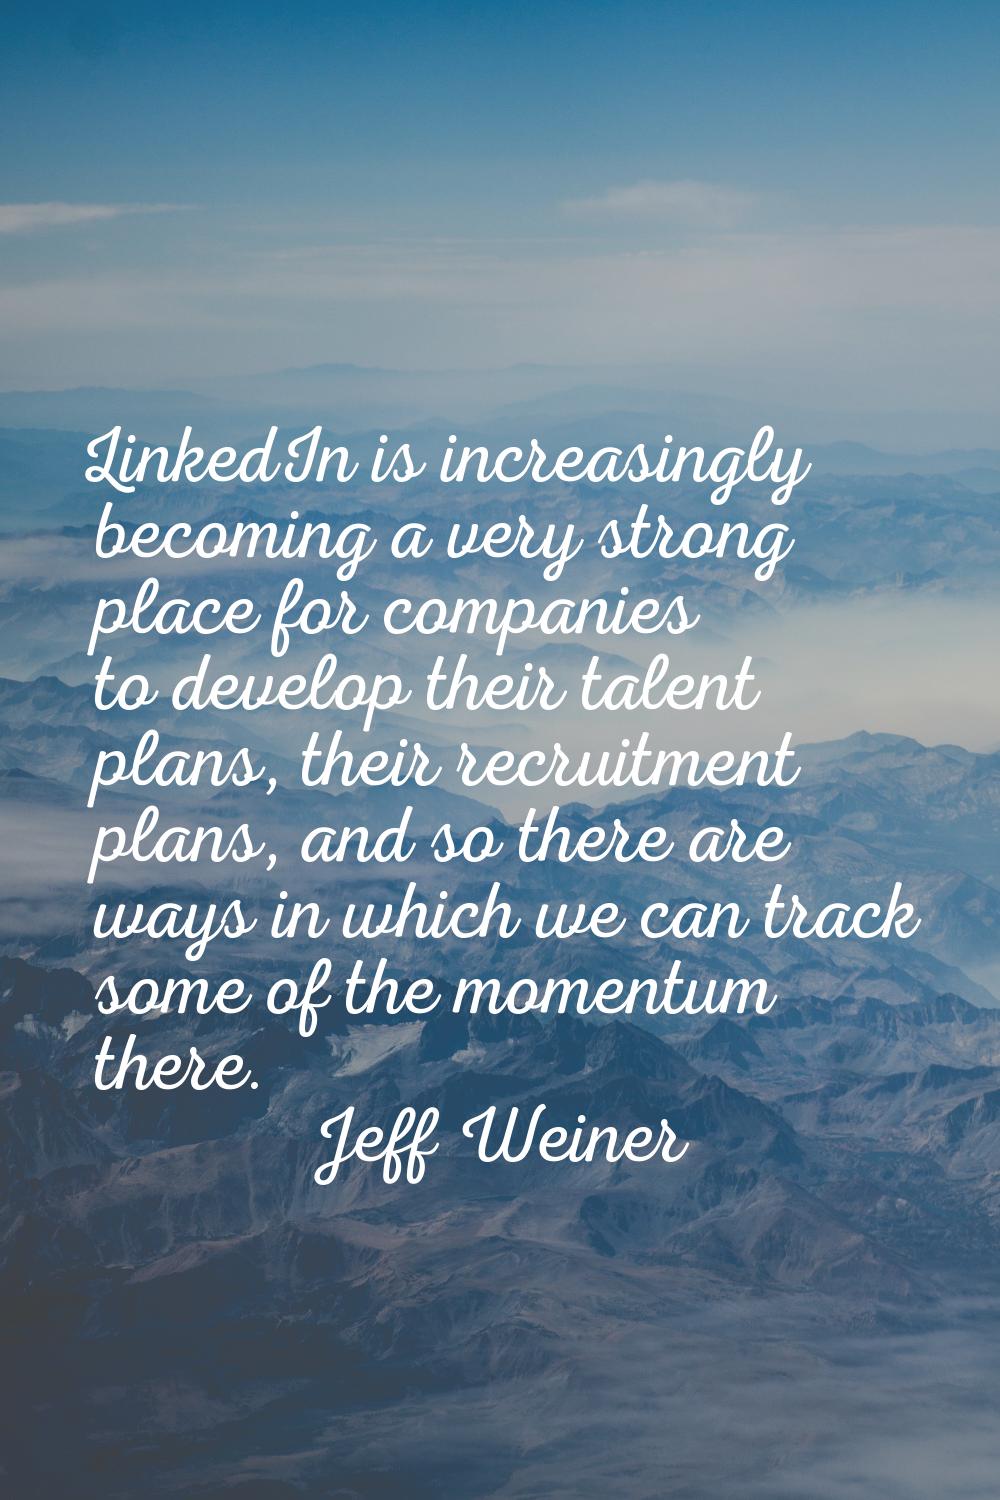 LinkedIn is increasingly becoming a very strong place for companies to develop their talent plans, 